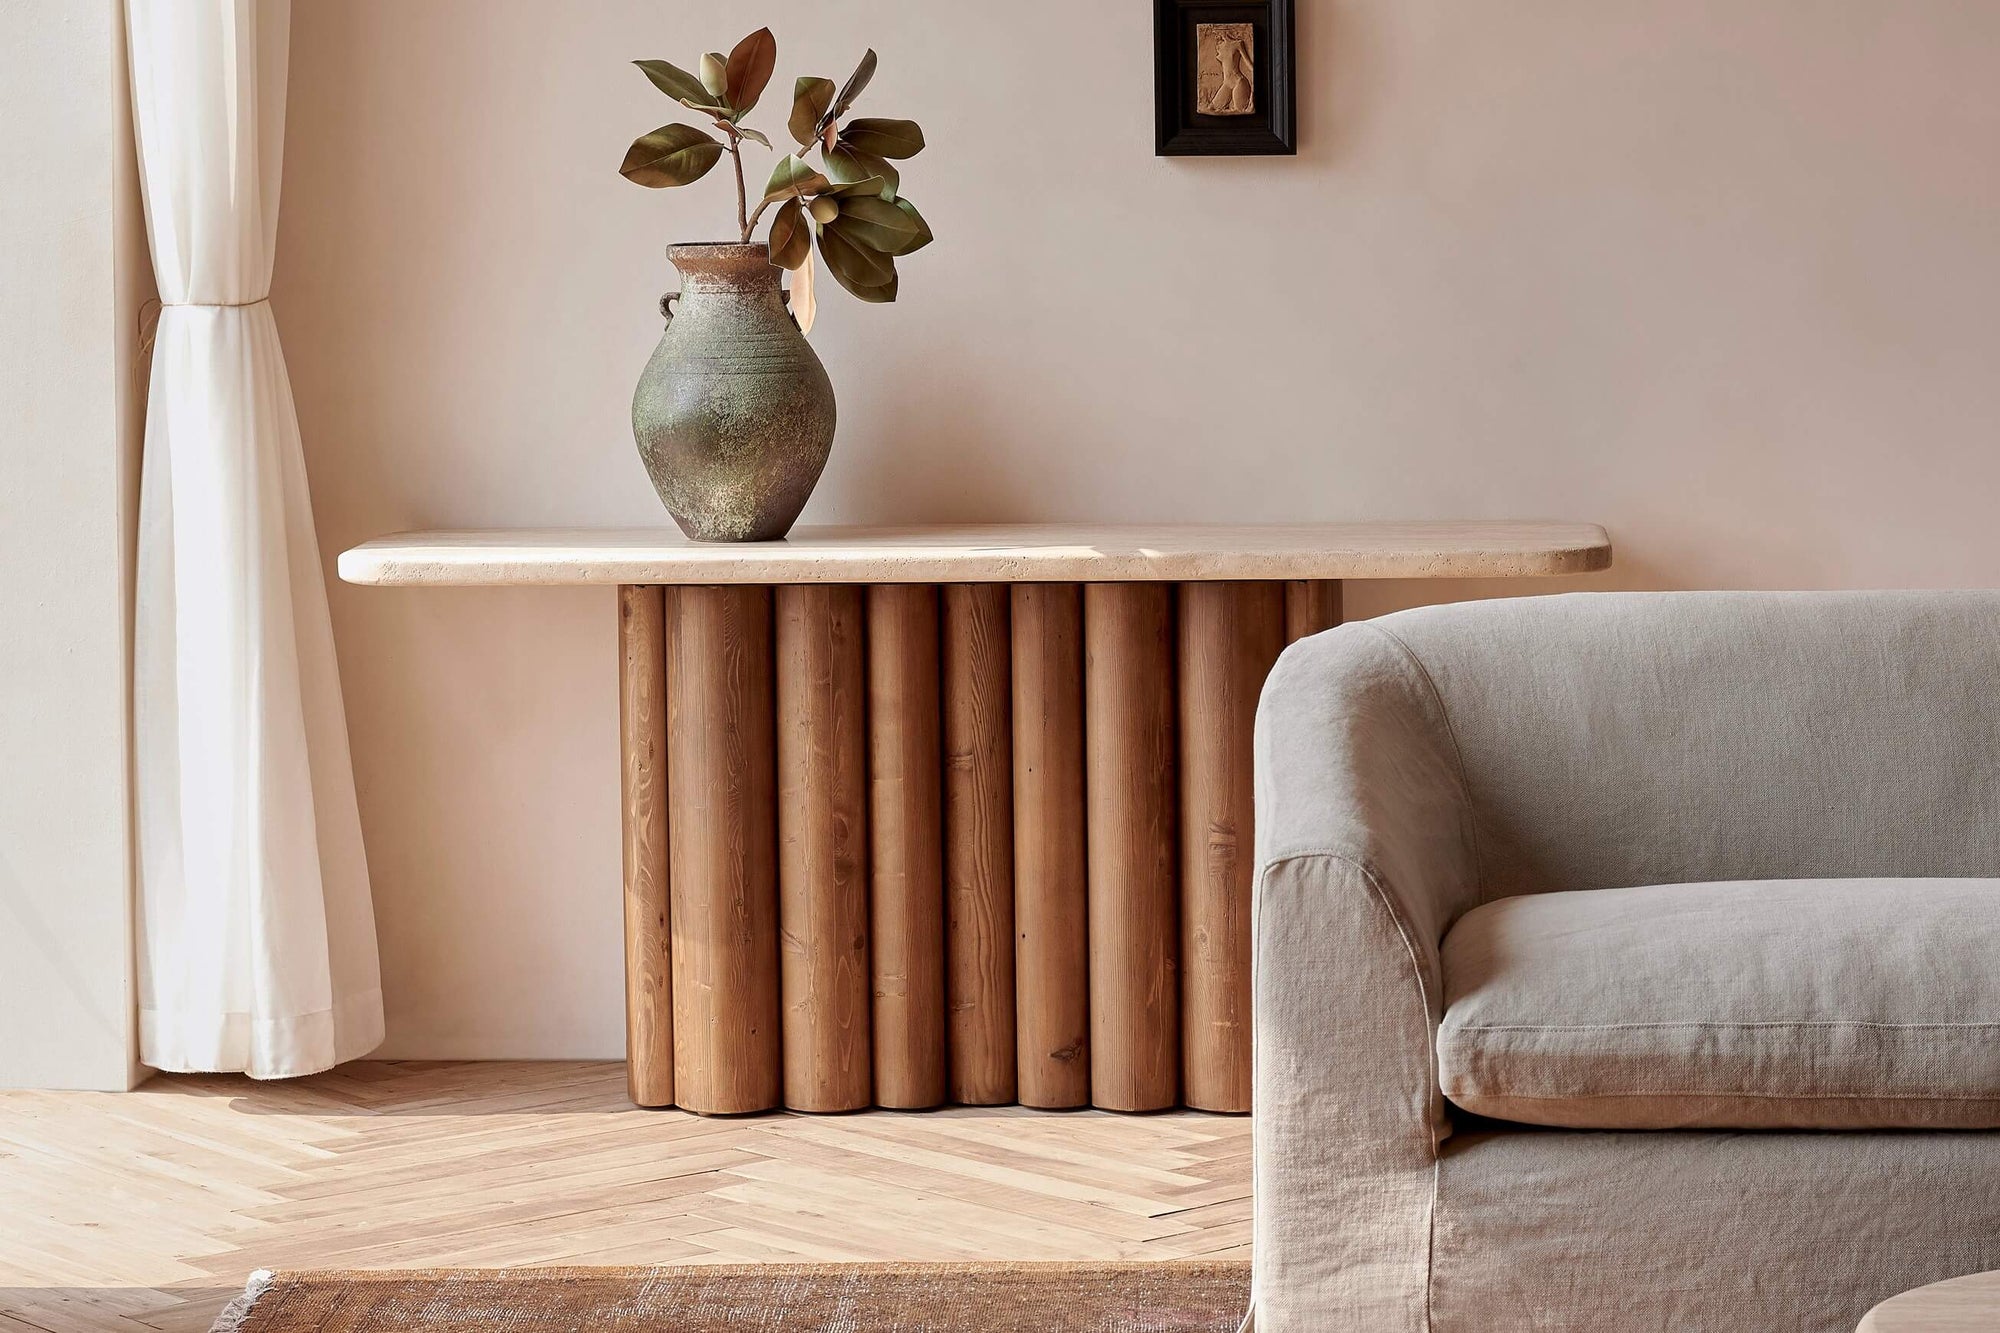 Enzo Console Table in Heritage Pine with a Galata Travertine Tabletop placed against a wall with a vase